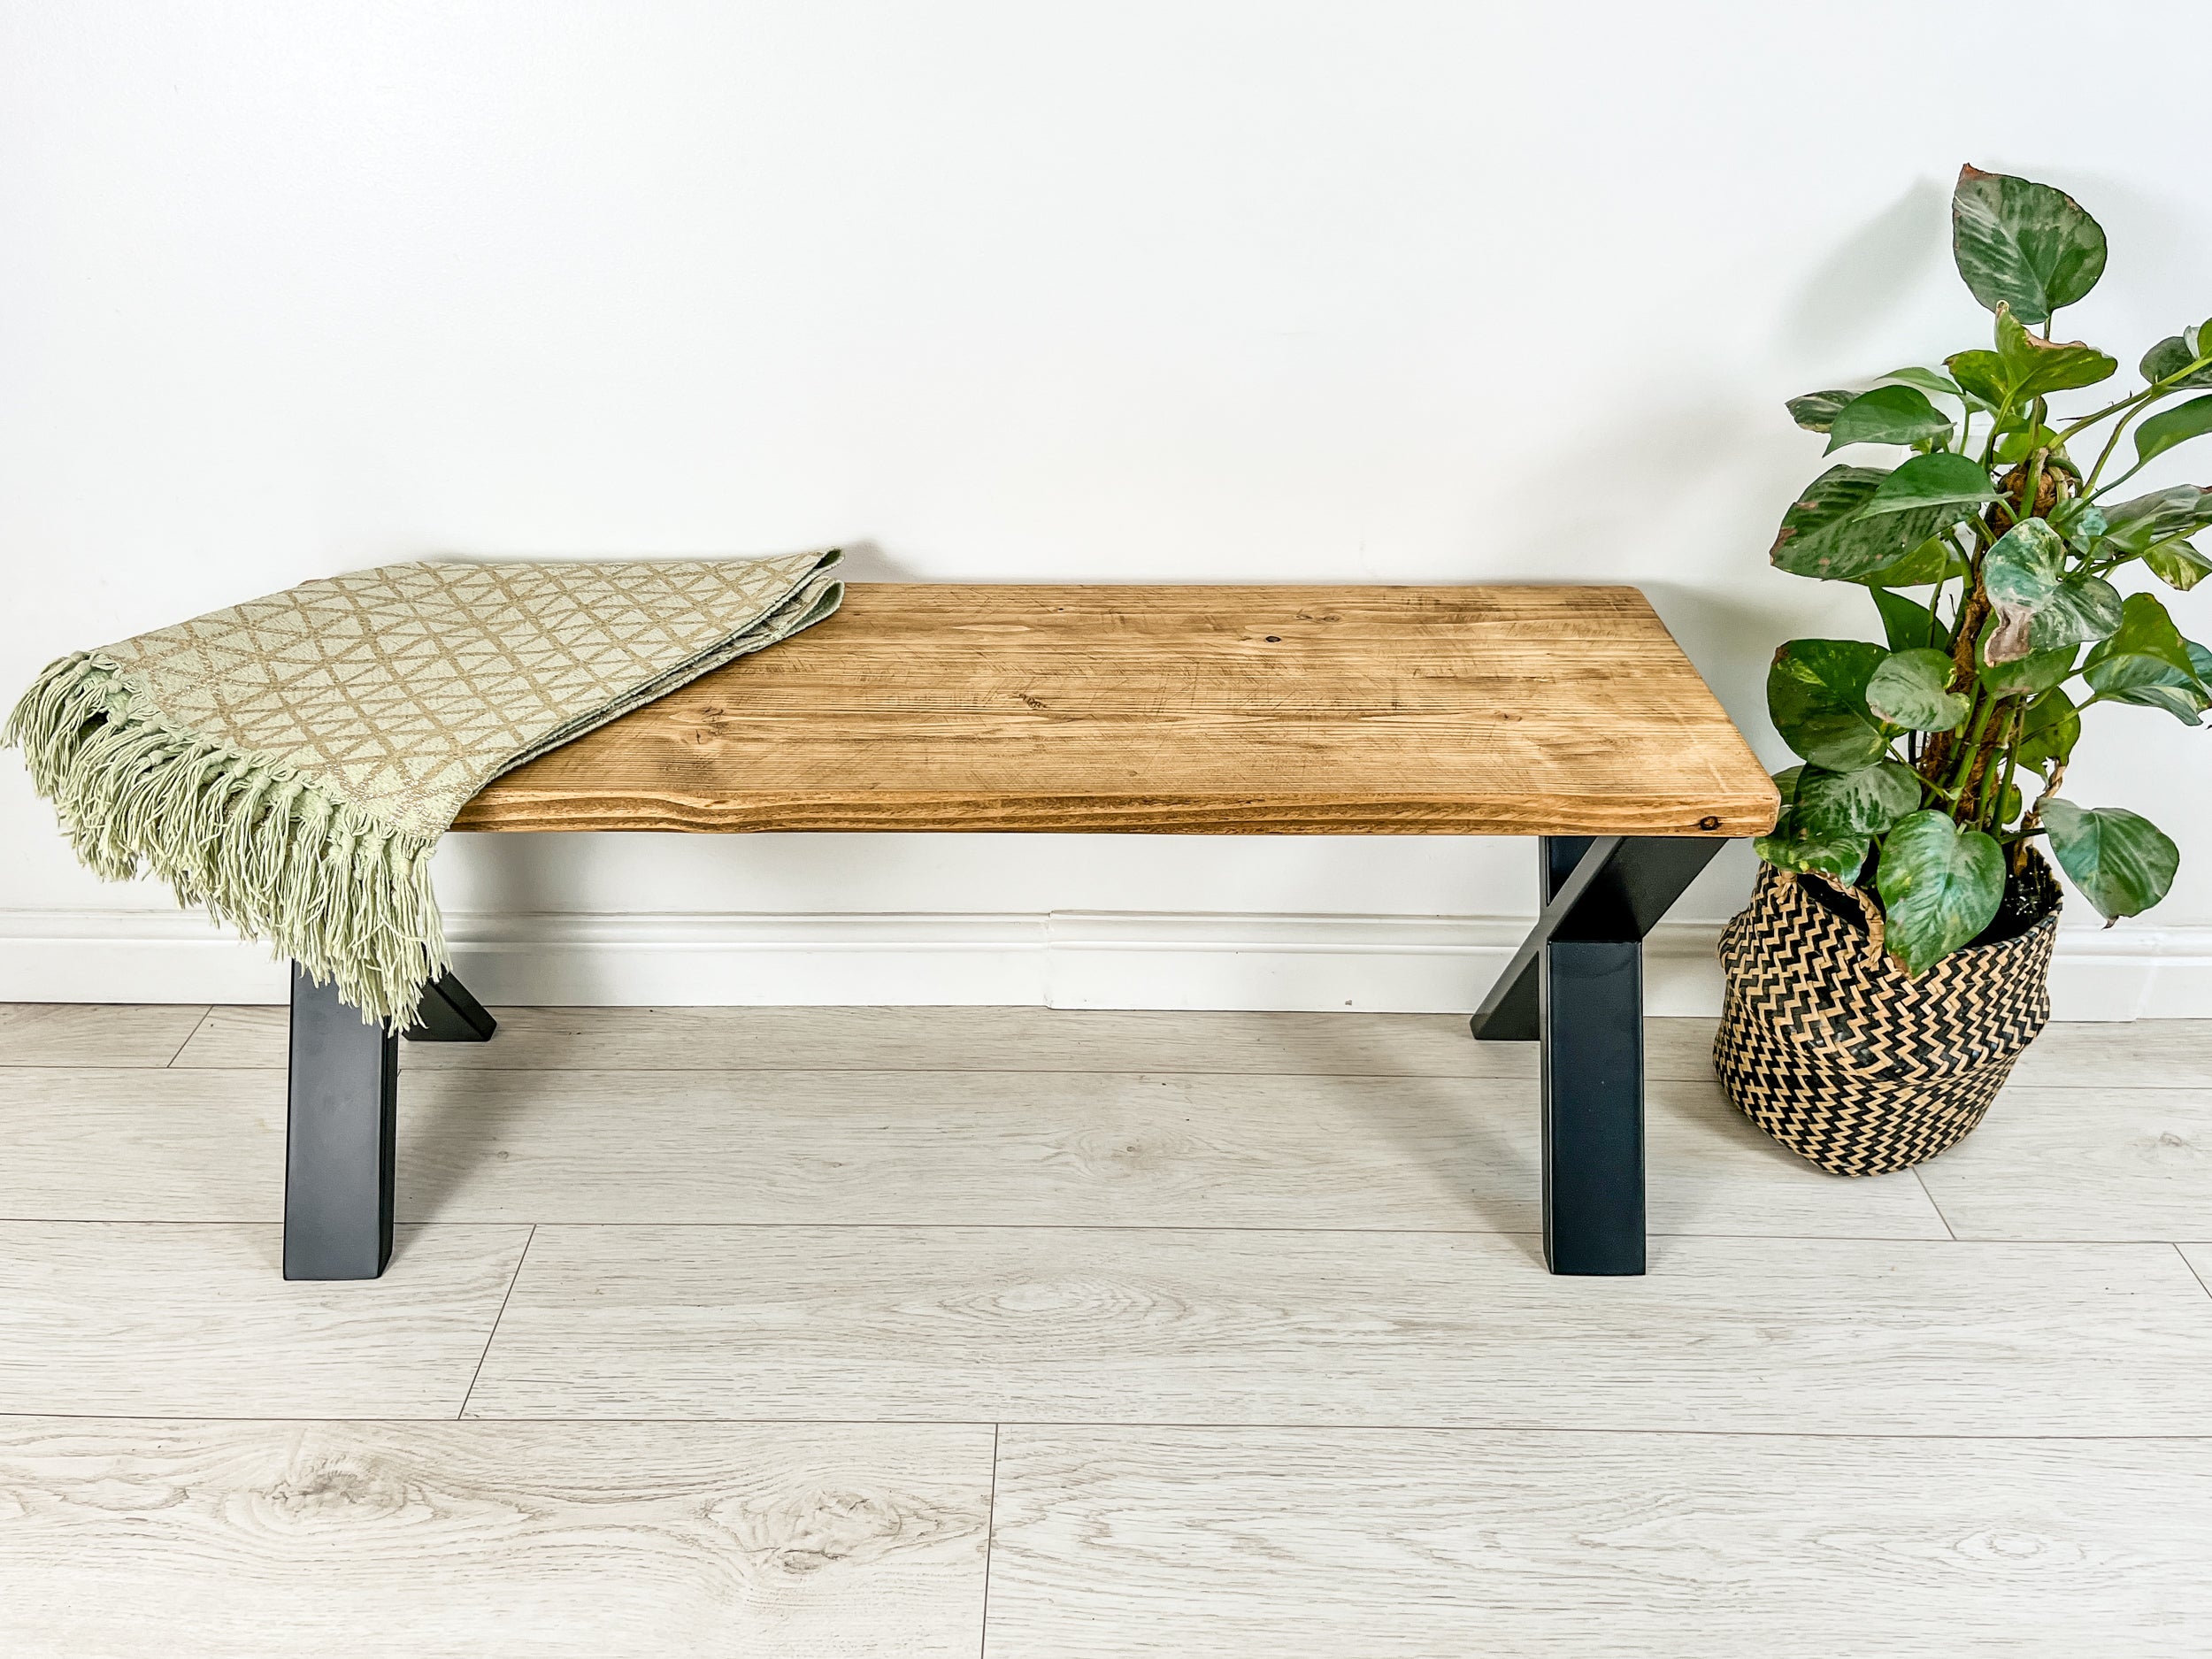 Rustic Wood Bench with Steel X-Frame Legs